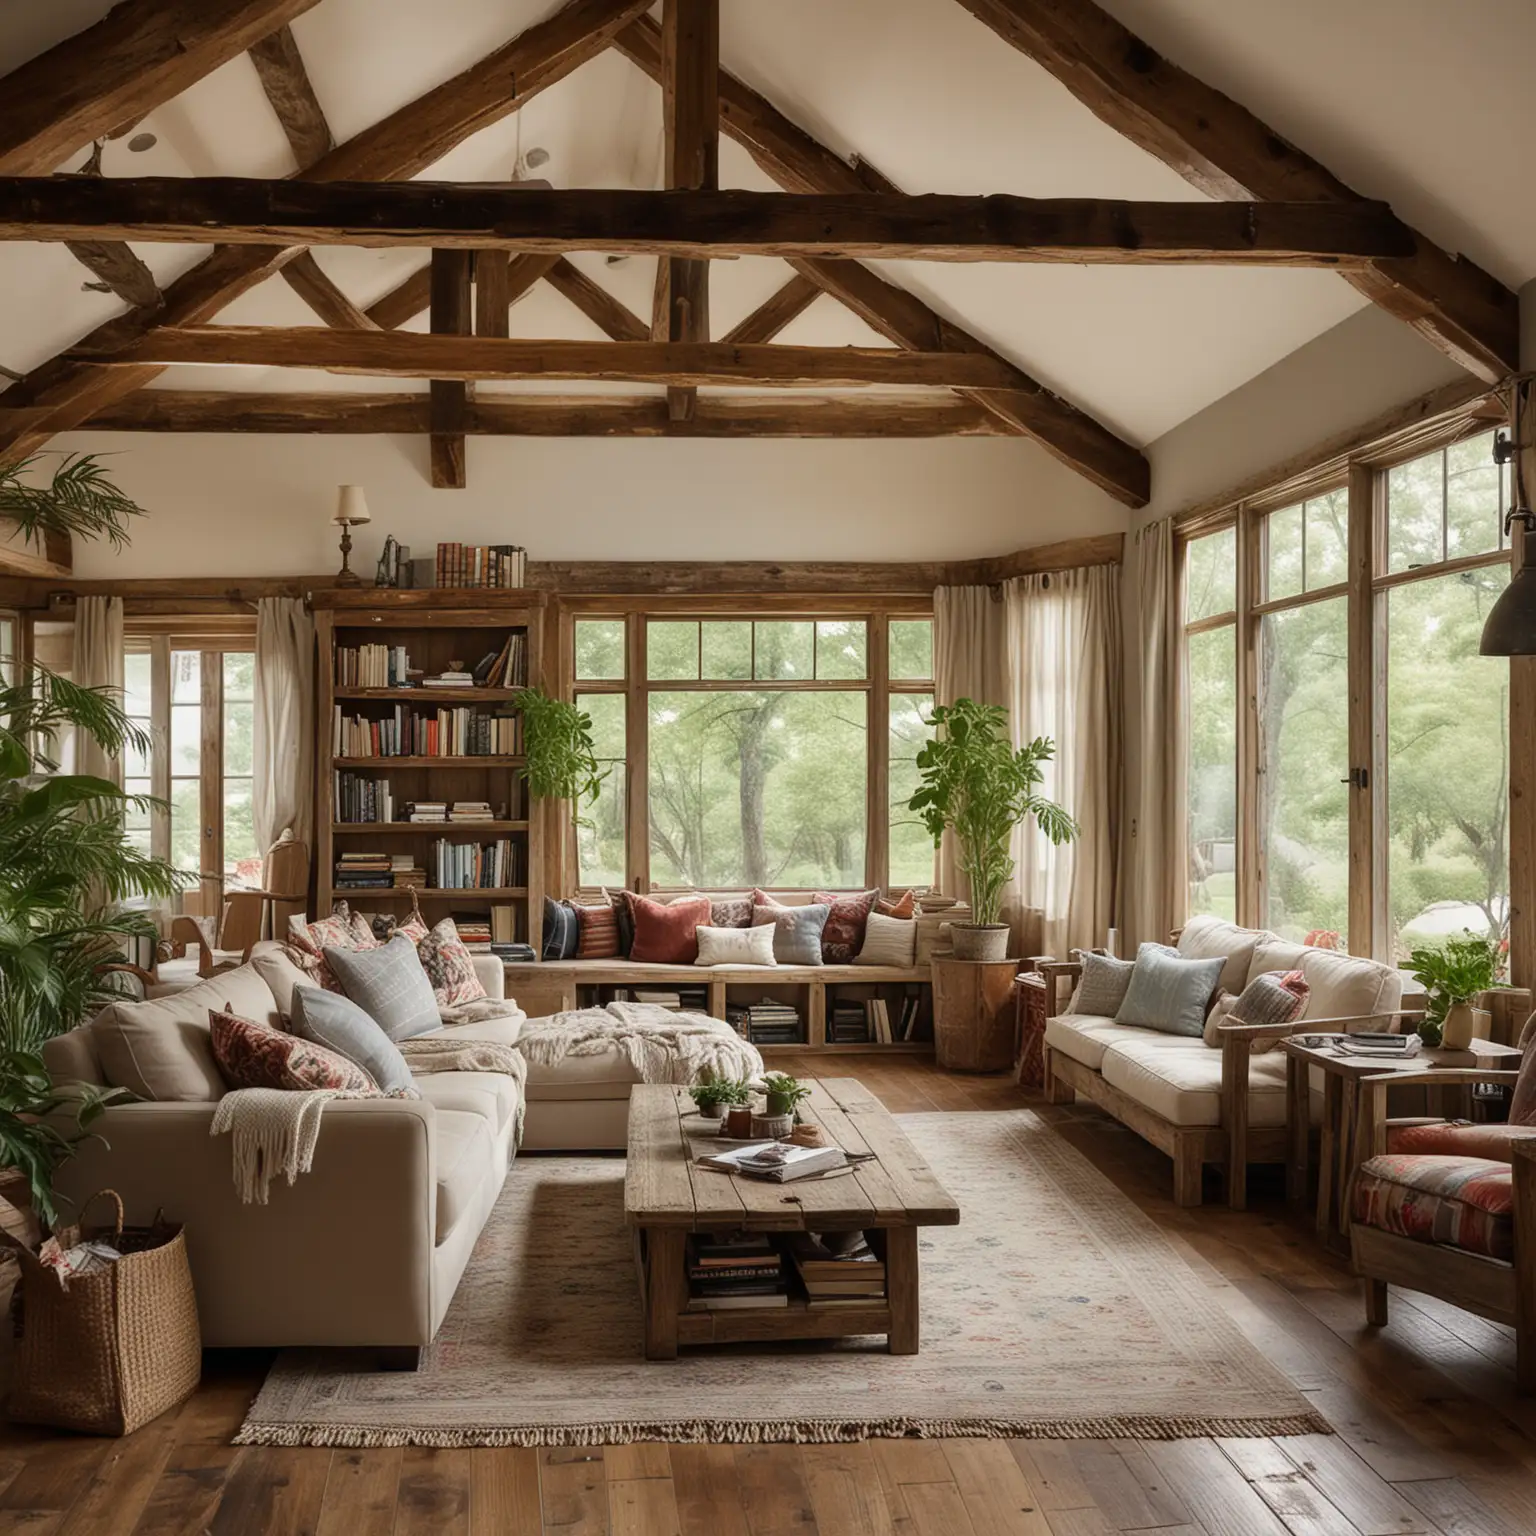 Rustic-OpenConcept-Living-Space-with-Natural-Light-and-Comfortable-Seating-Area